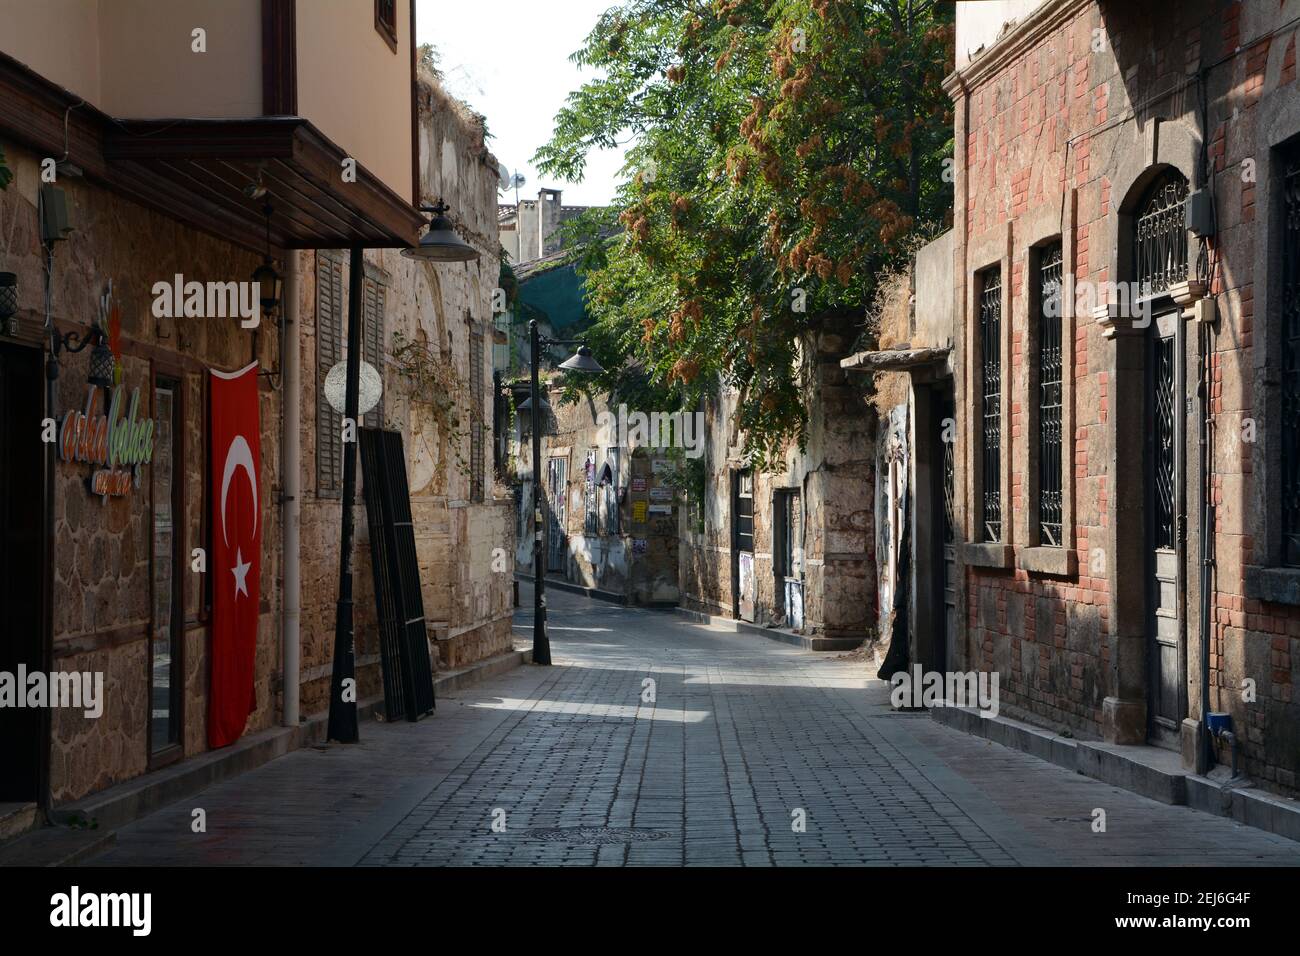 Quiet and empty side street in Antalya old town early in the morning. The Turkish flag hanging from one wall. Sep 2015 Stock Photo